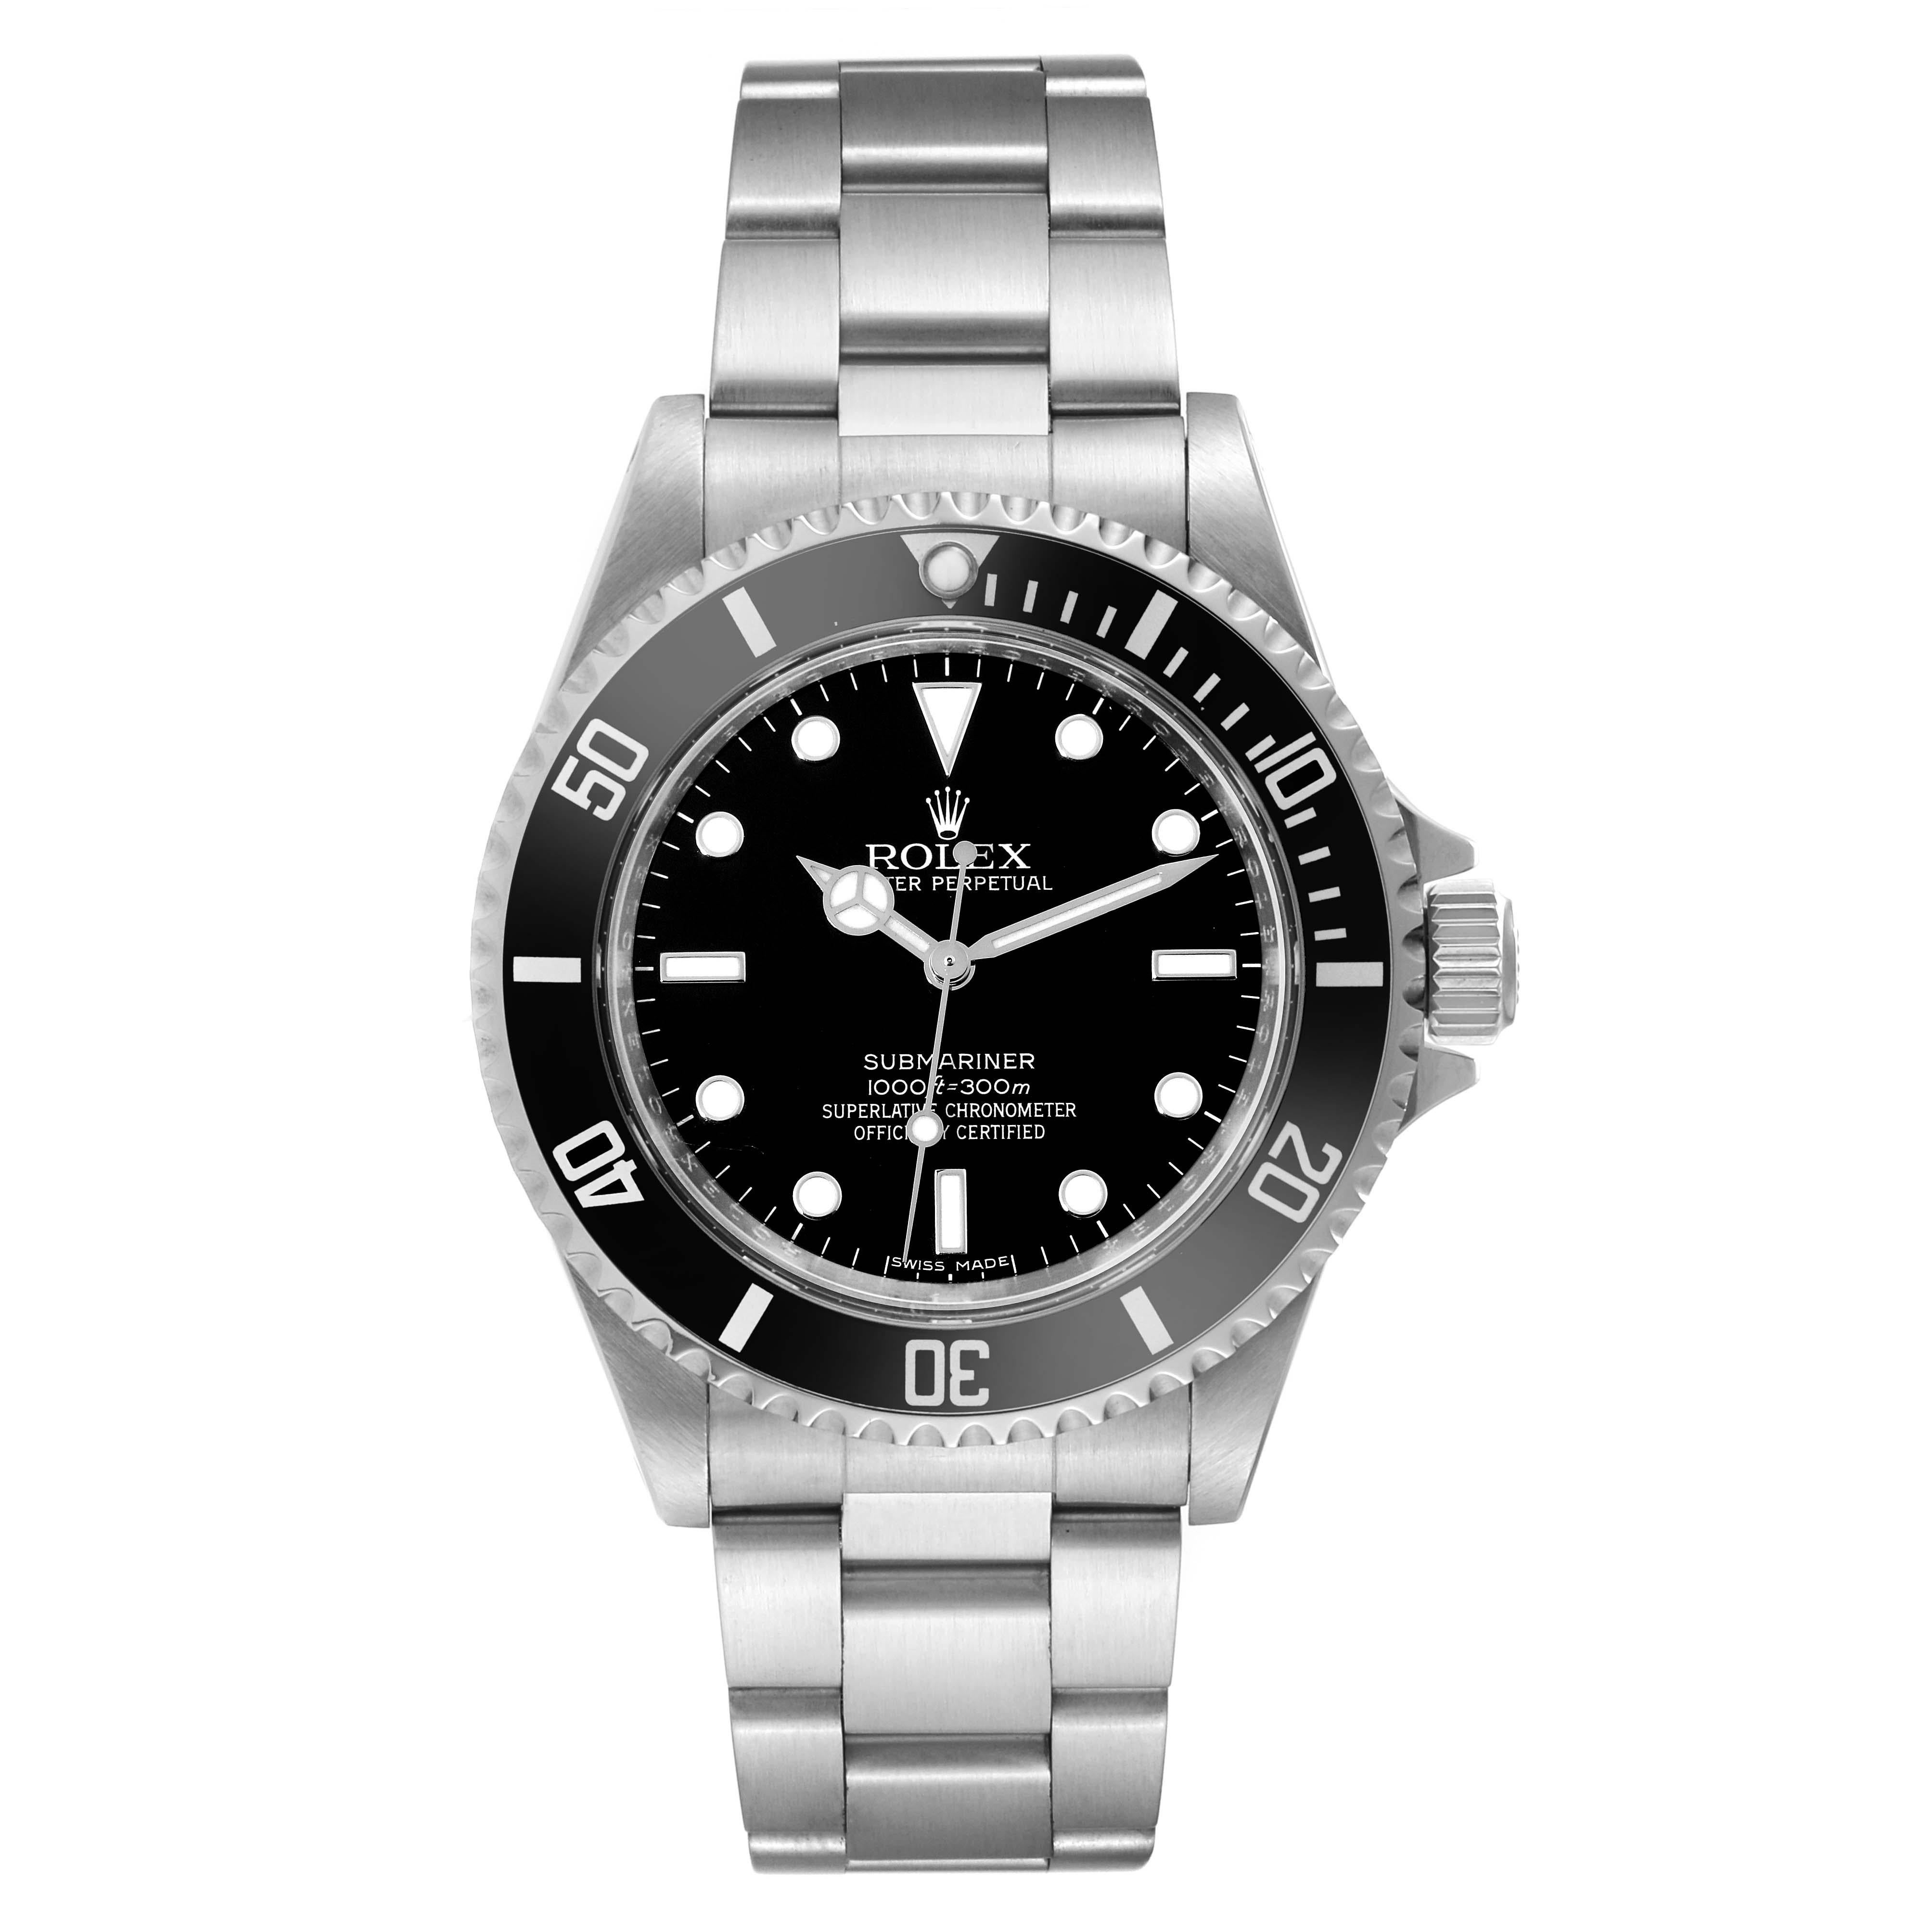  Rolex Submariner No Date 40mm 4 Liner Steel Mens Watch 14060 Box Card Pour hommes 